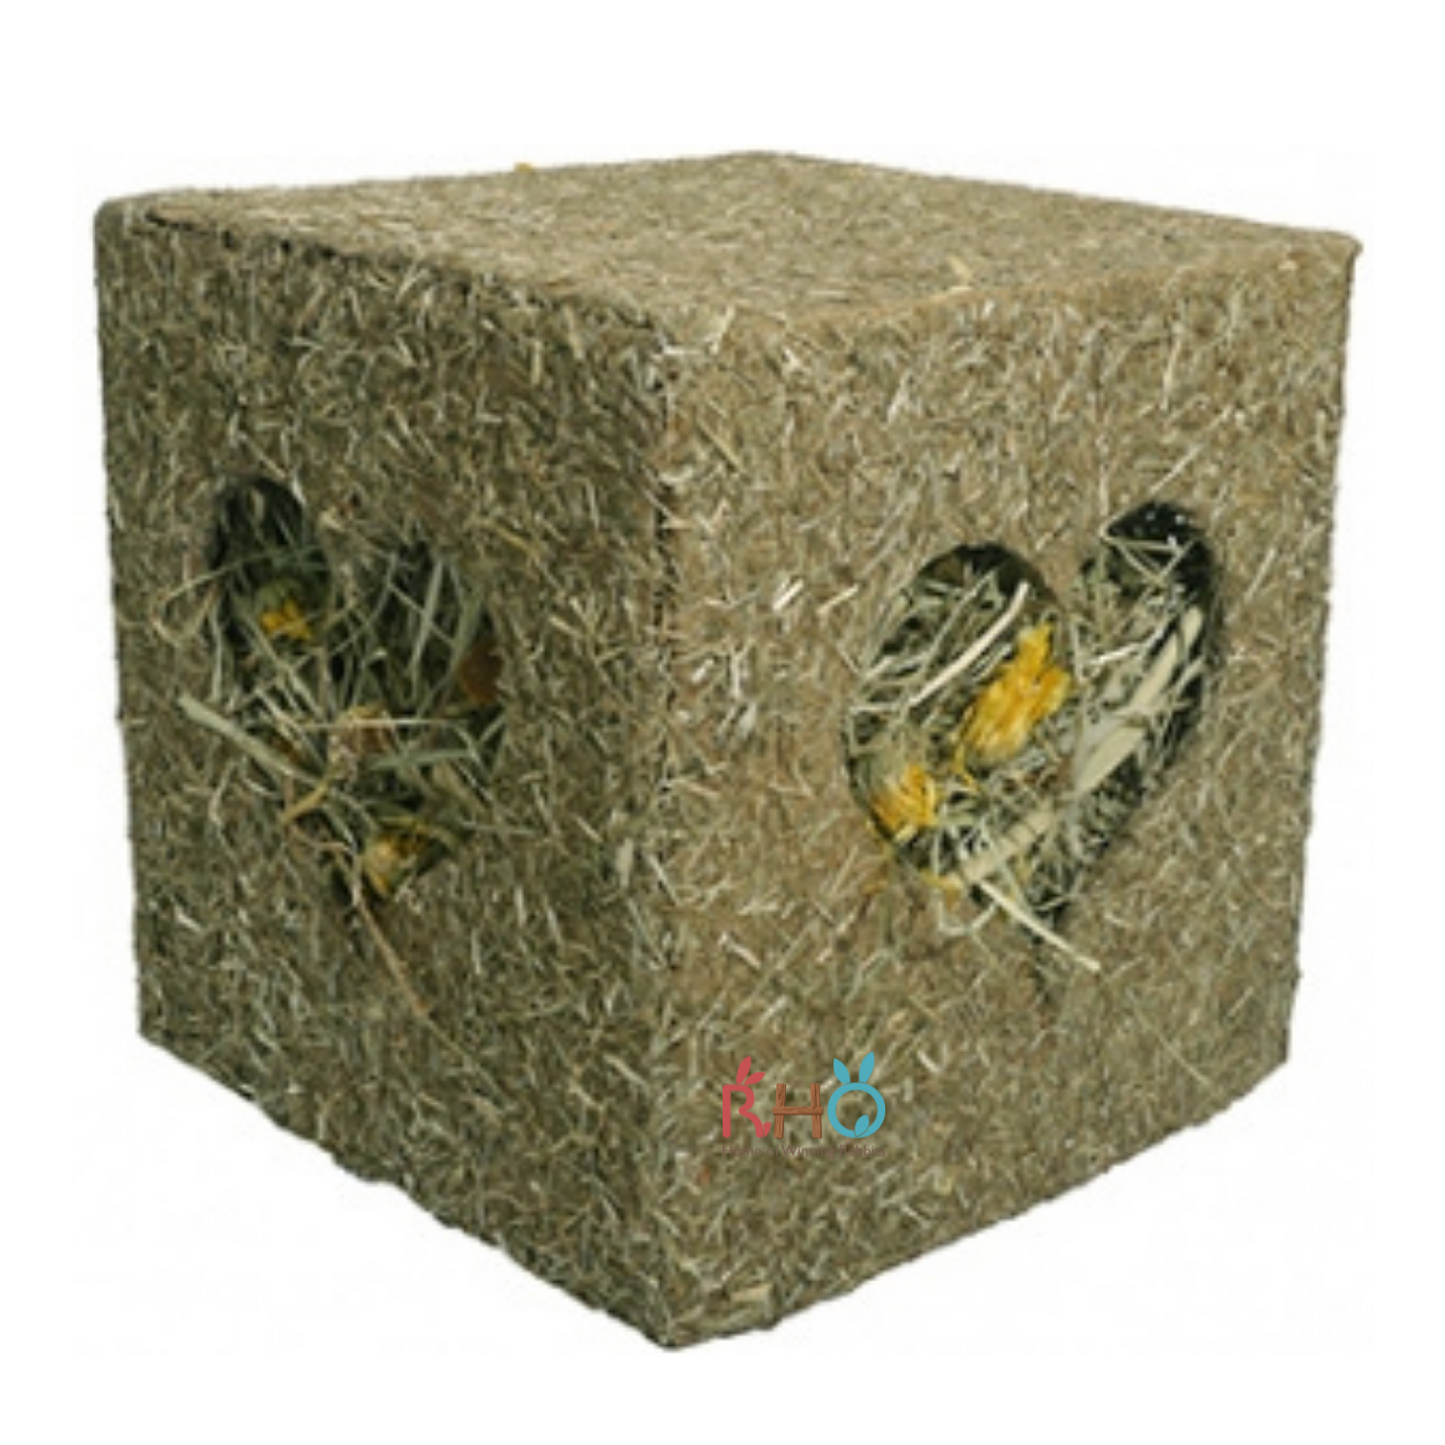 Rosewood - I Love Hay Cube (Large) 540g